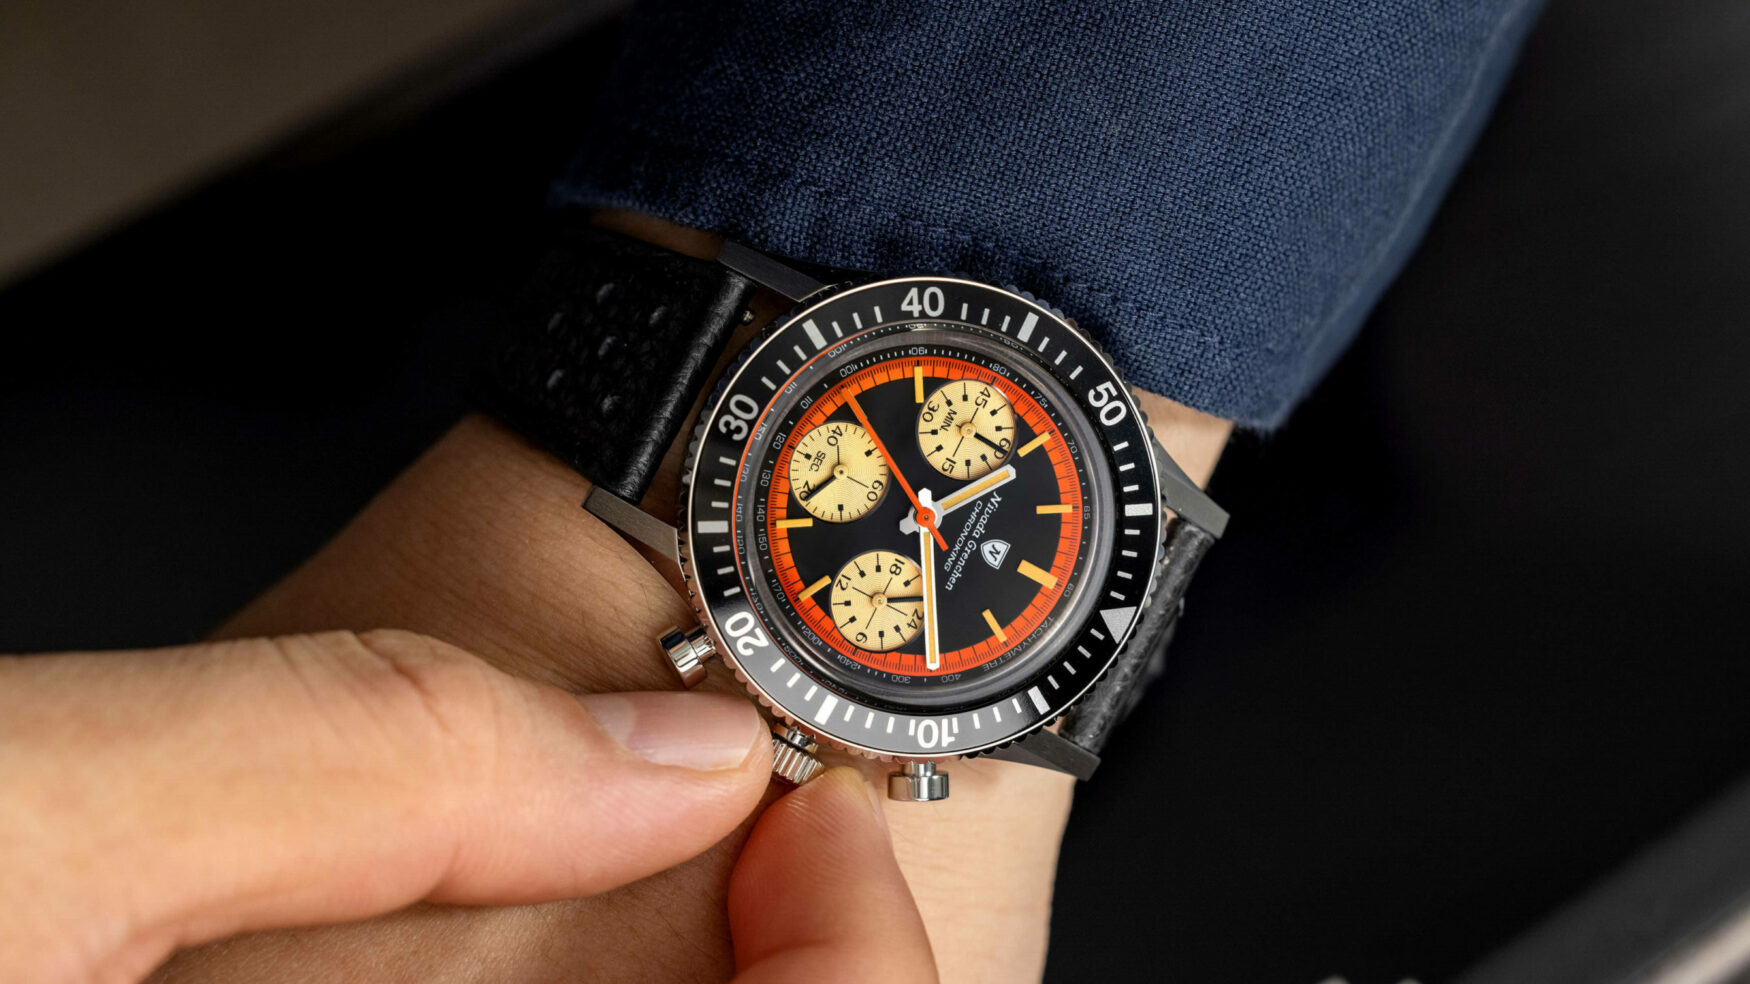 The Nivada Grenchen Chronoking “Paul Newman” Orange hits vintage notes for under US$500